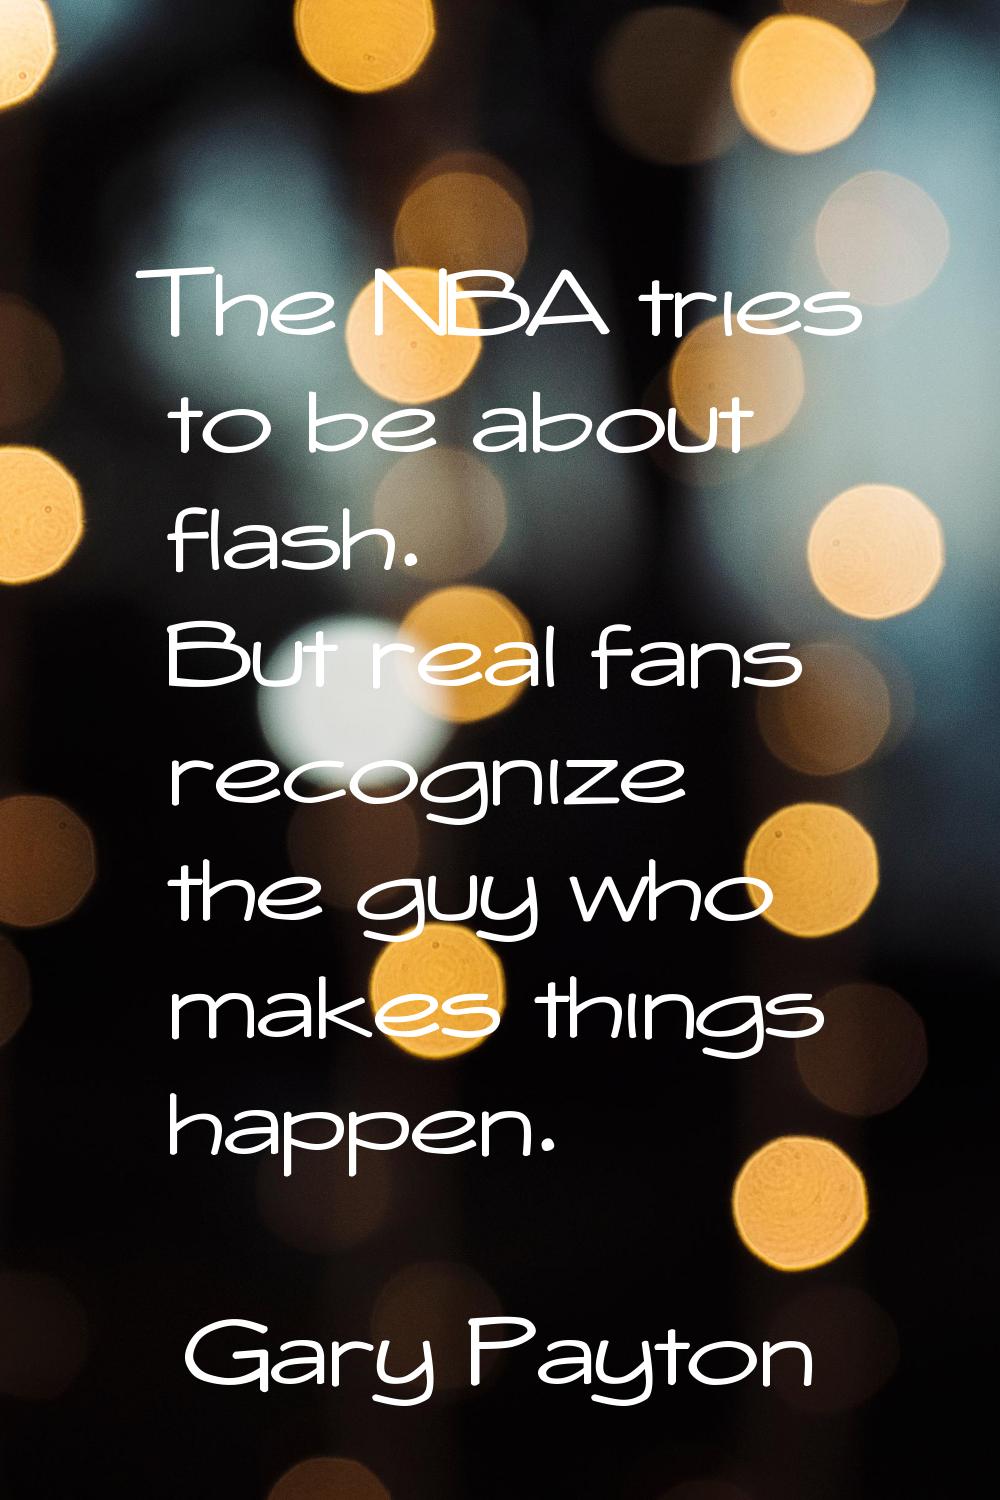 The NBA tries to be about flash. But real fans recognize the guy who makes things happen.